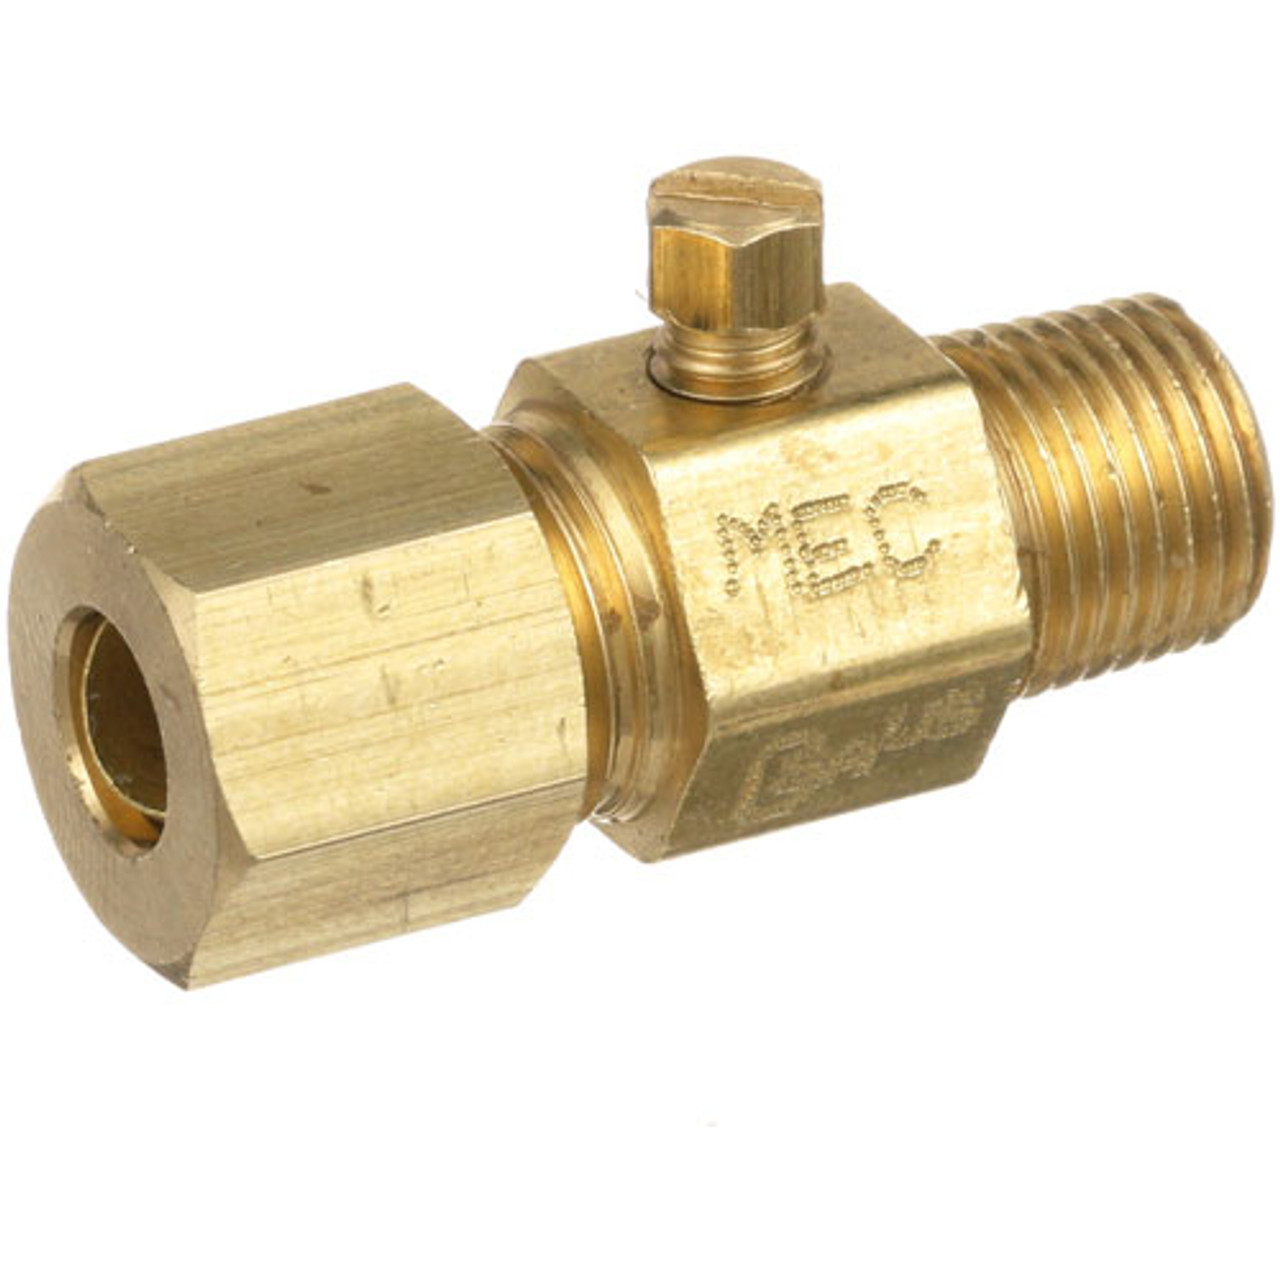 Pilot Valve 1/8 Mpt X 1/4 Cc - Replacement Part For Star Mfg 2V-Y1177